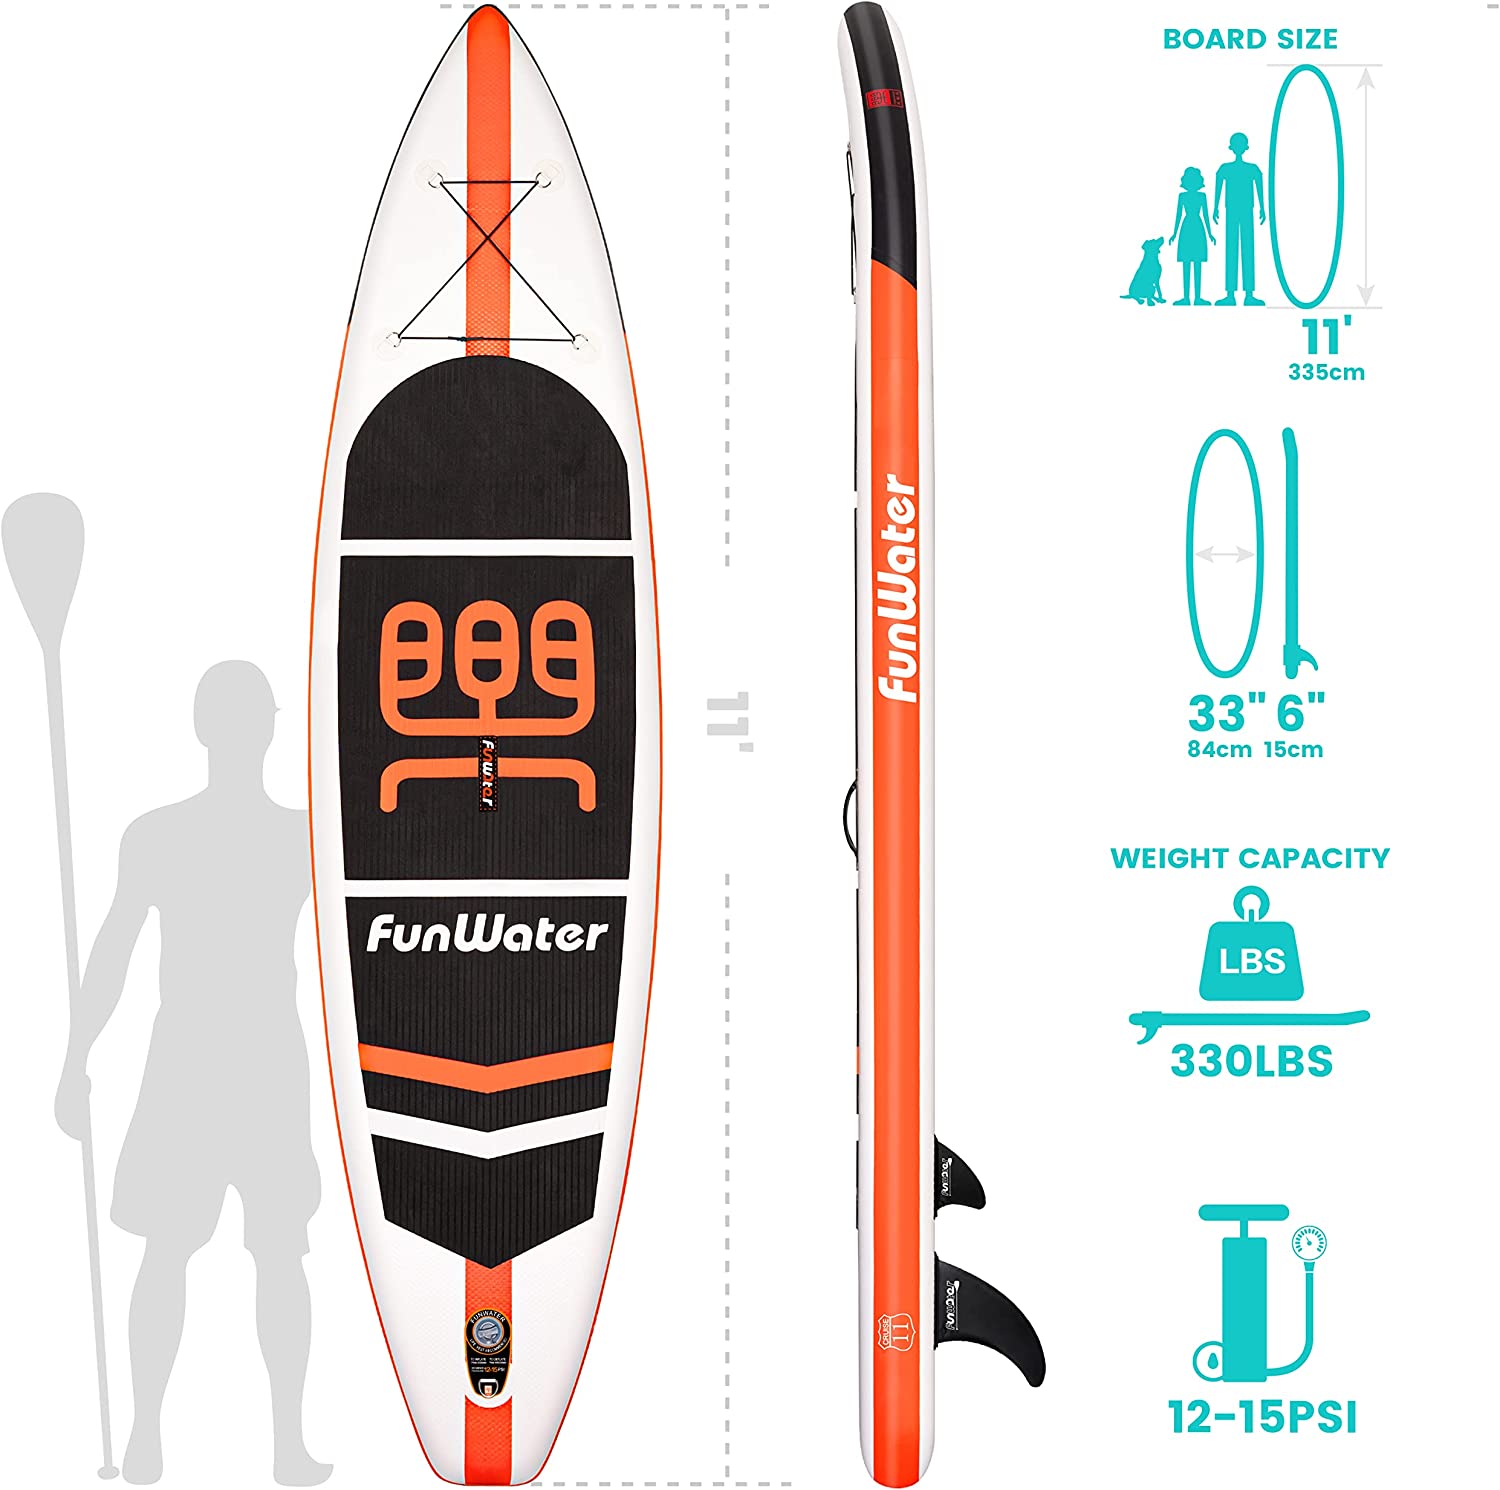 Light 20 4Lbs Inflatable Paddleboard Isup Accessories Fins Adjustable Paddle Pump Backpack Leash Waterproof Phone-1